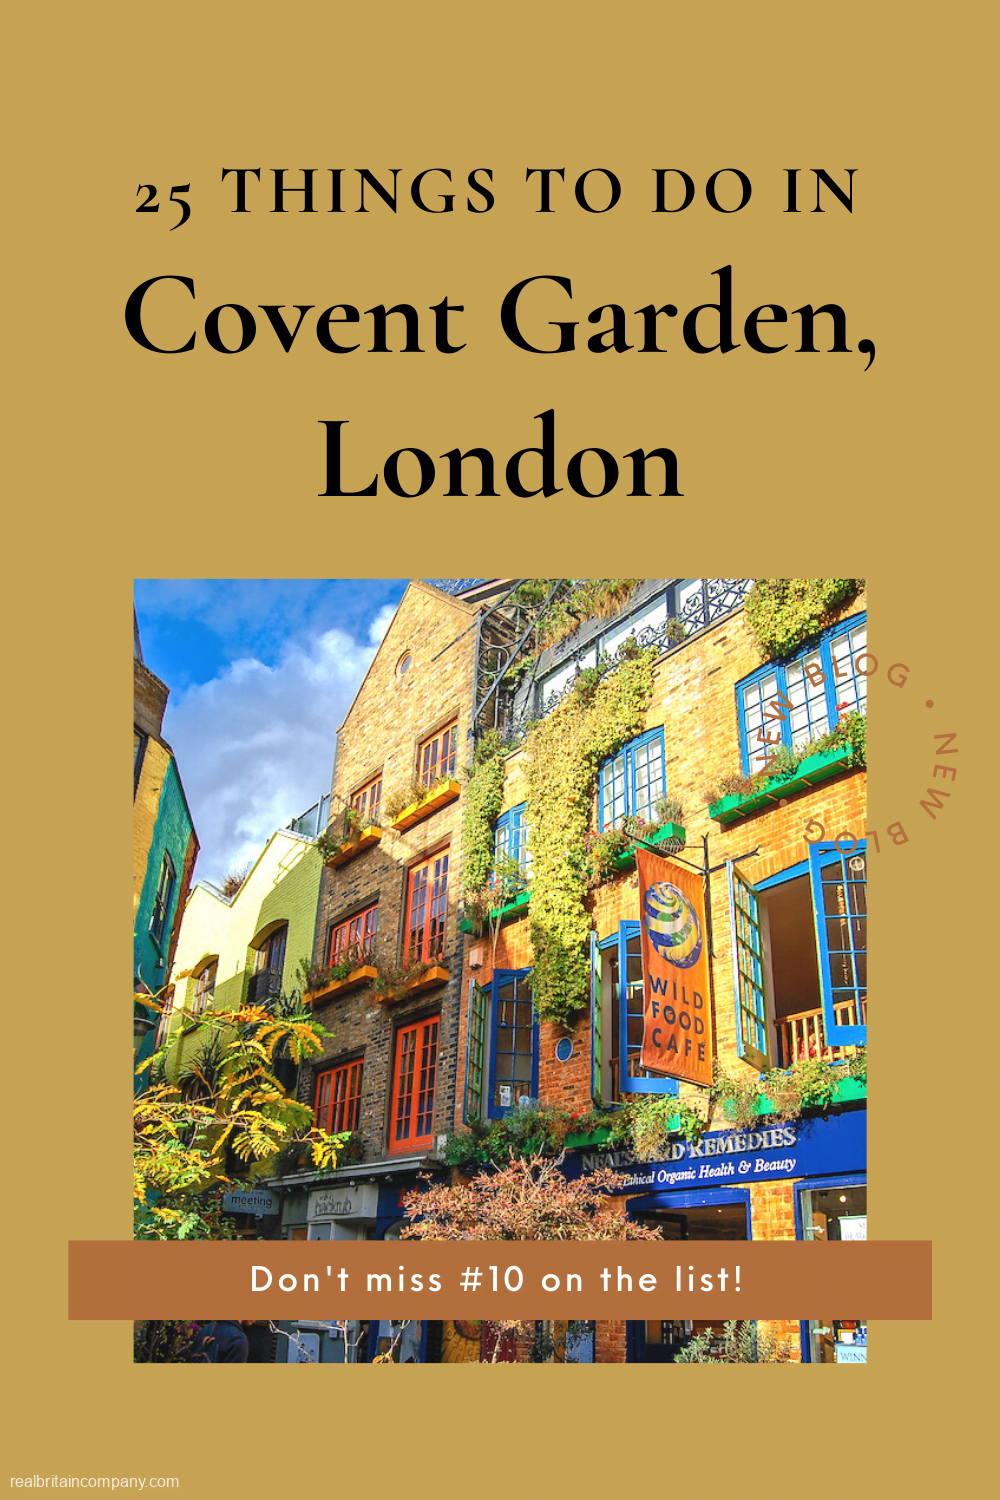 25 things to do in Covent Garden, London - The Real Britain Company